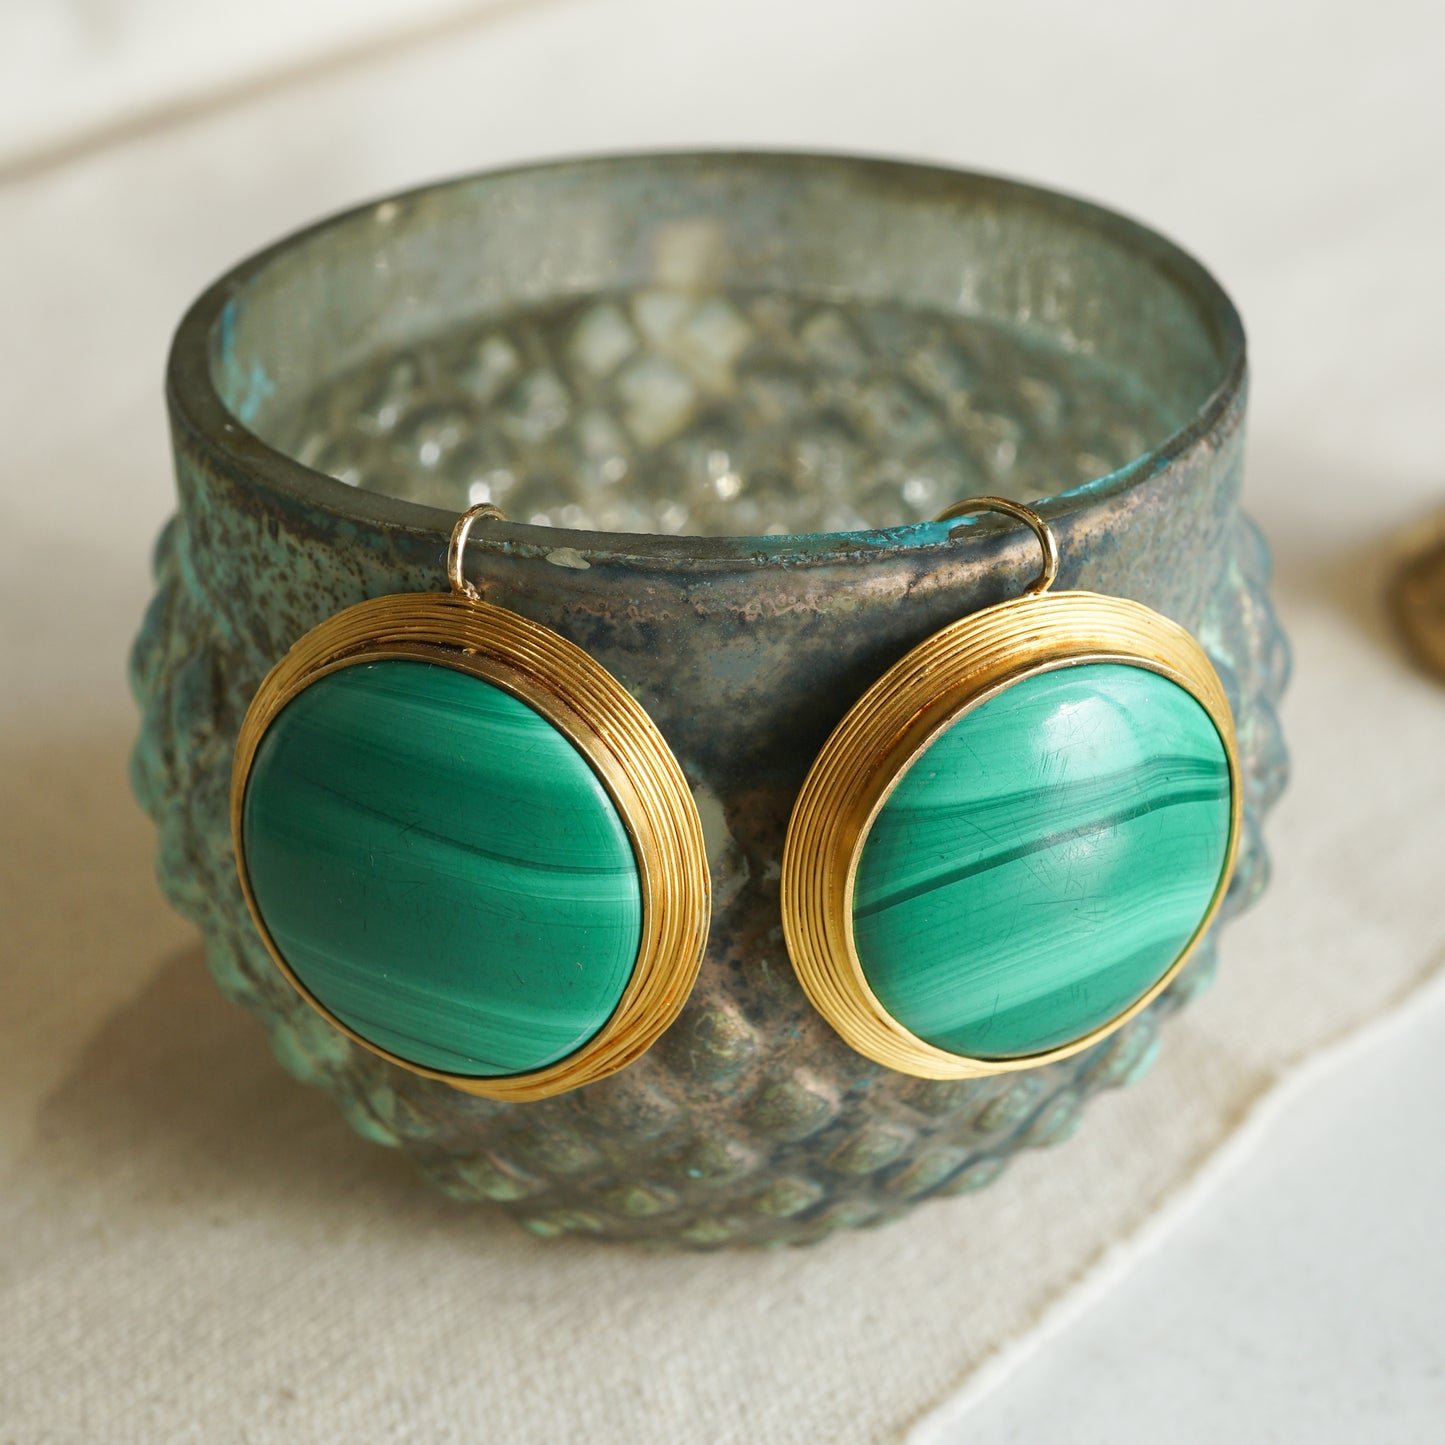 Large Cabochon Malachite Earrings in 14k Yellow Gold